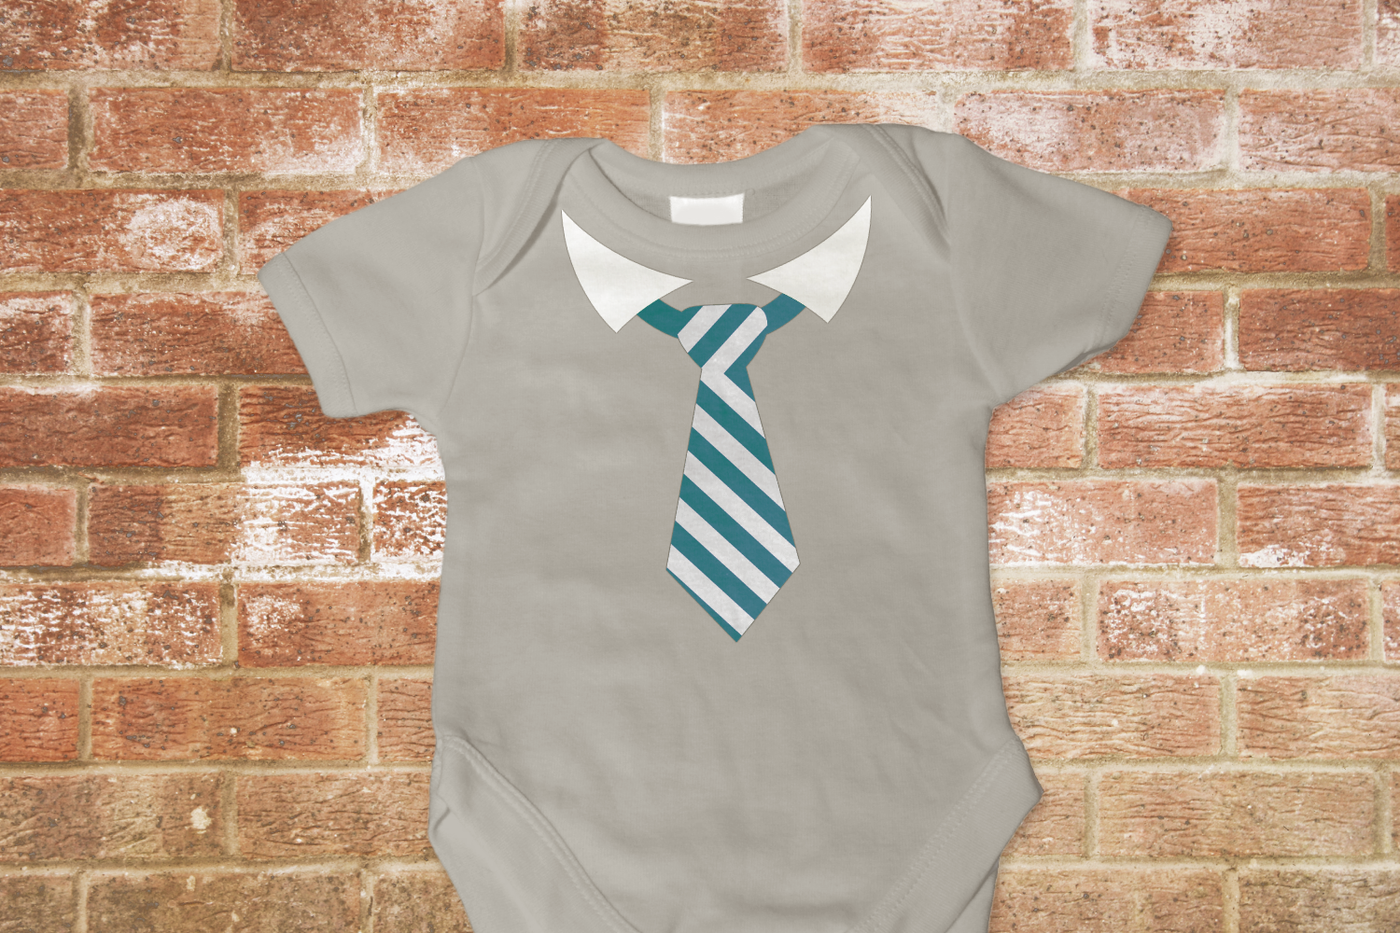 Striped tie with collar design